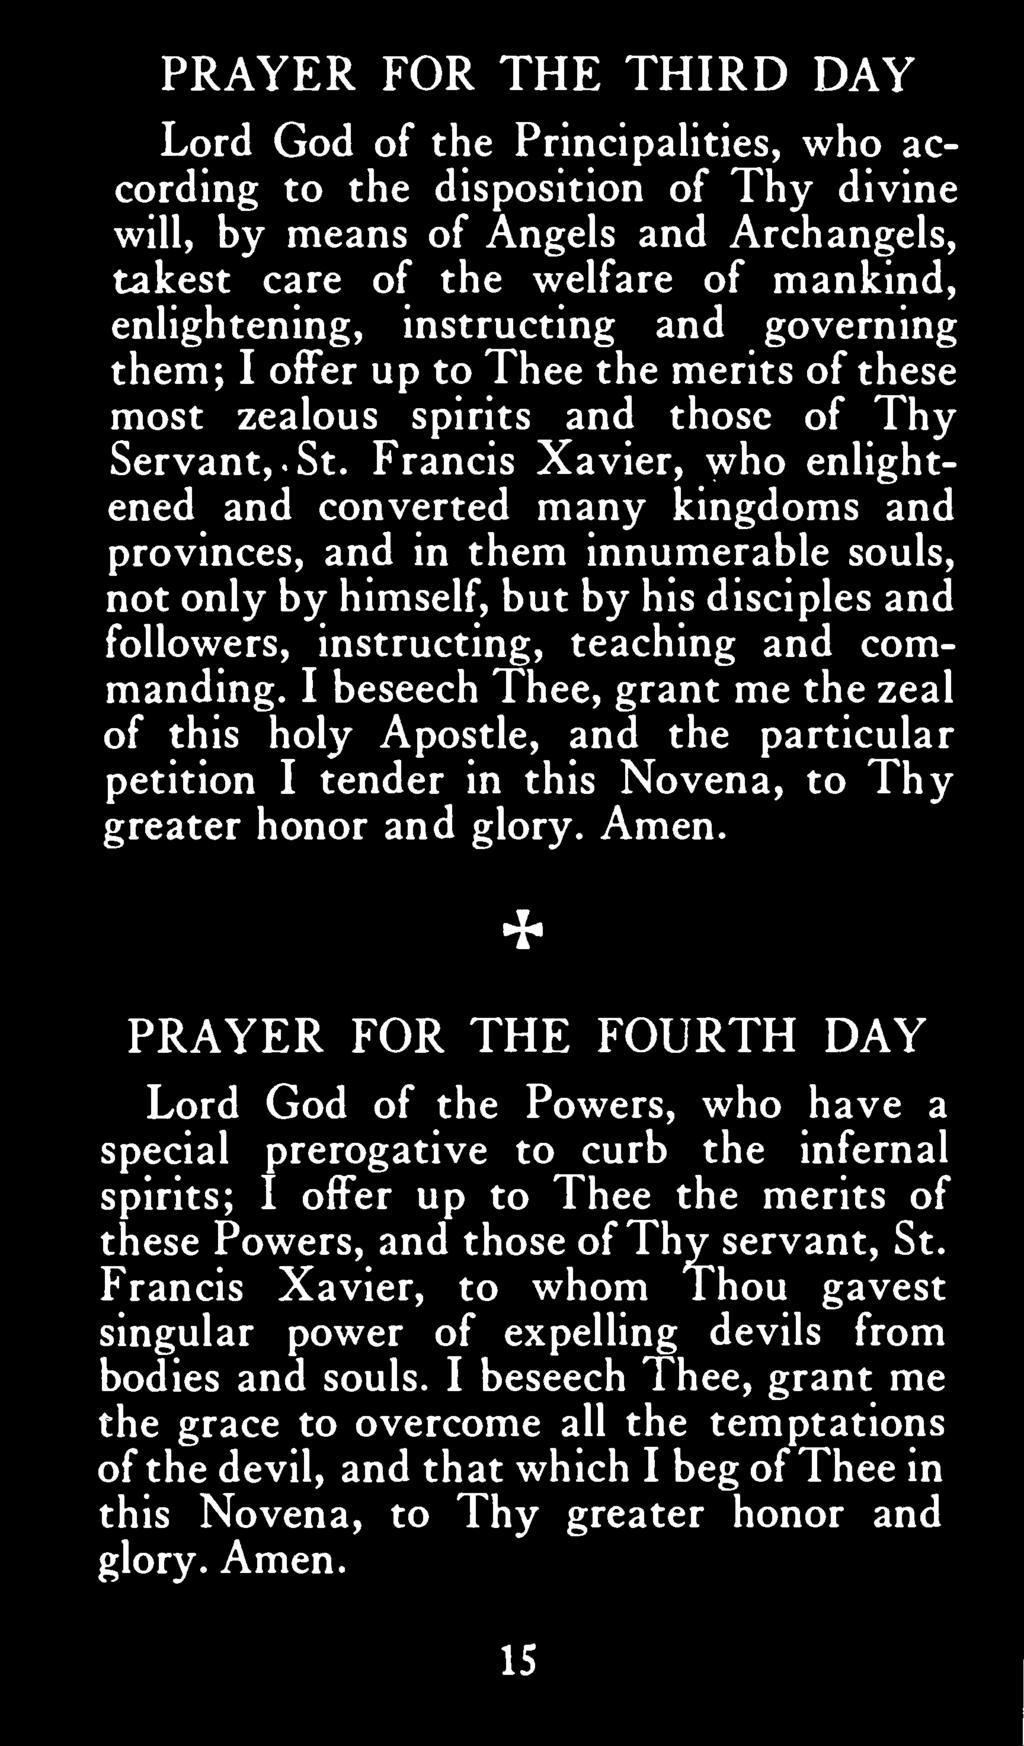 PRAYER FOR THE FOURTH DAY Lord God of the Powers, who have a special prerogative to curb the infernal spirits; I offer up to Thee the merits of these Powers, and those of Th /ant, St.